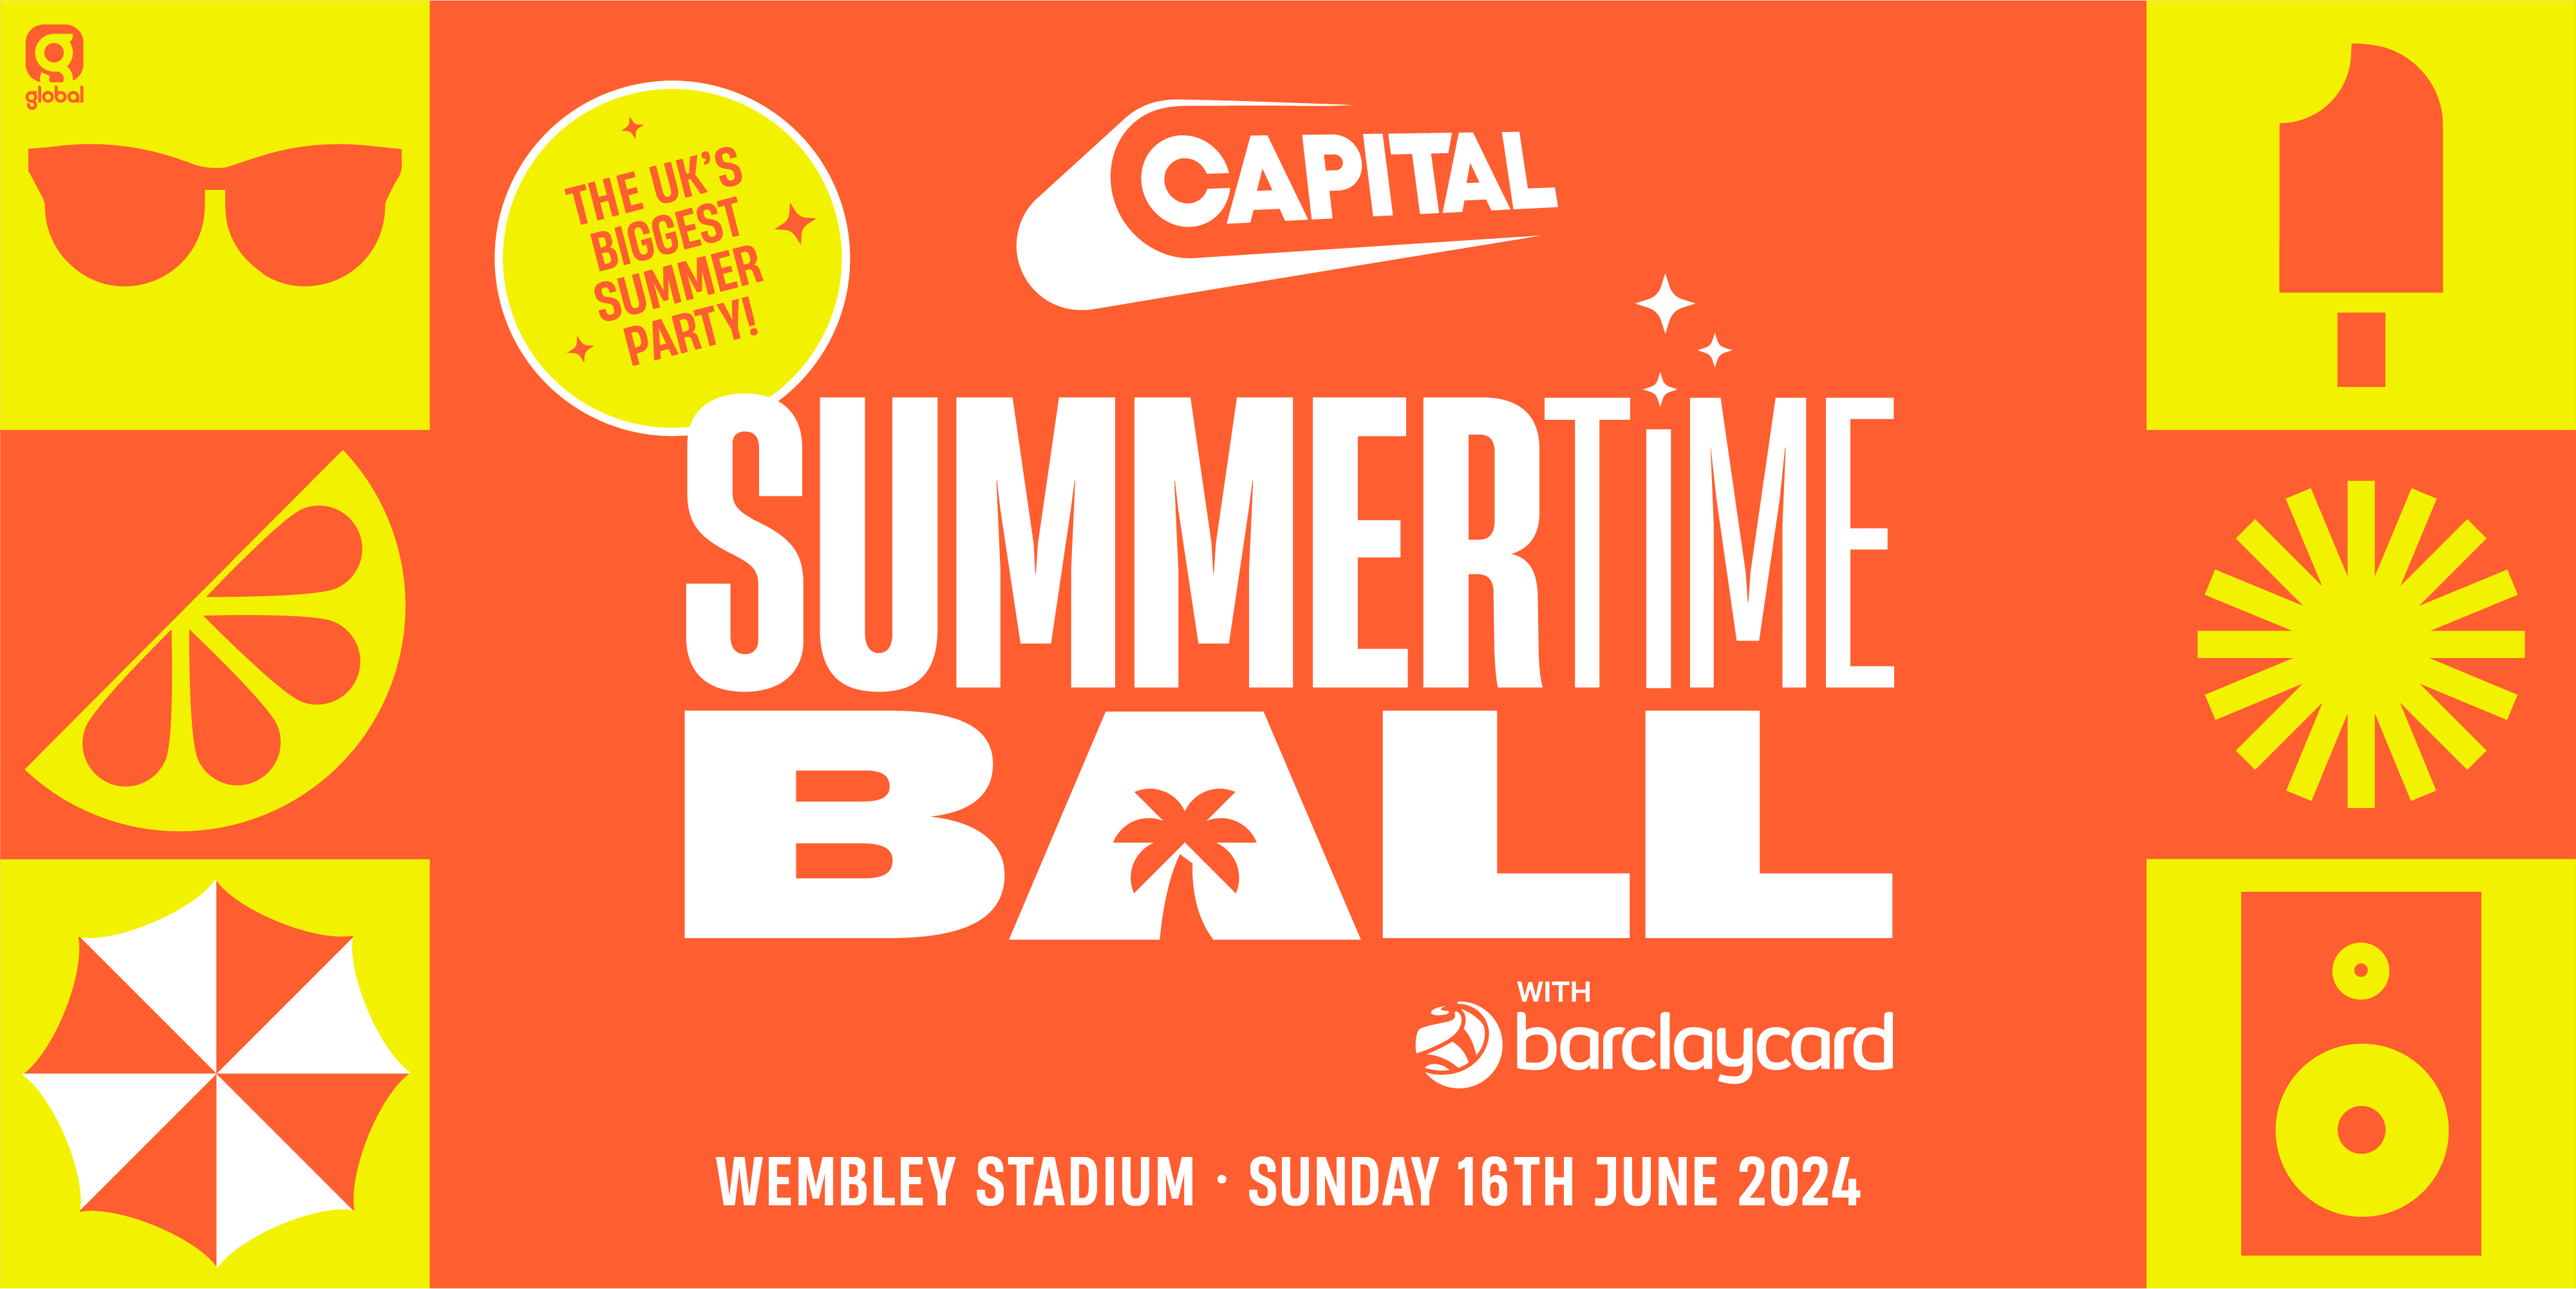 Capital announces date for its Summertime Ball for 2024 RadioToday